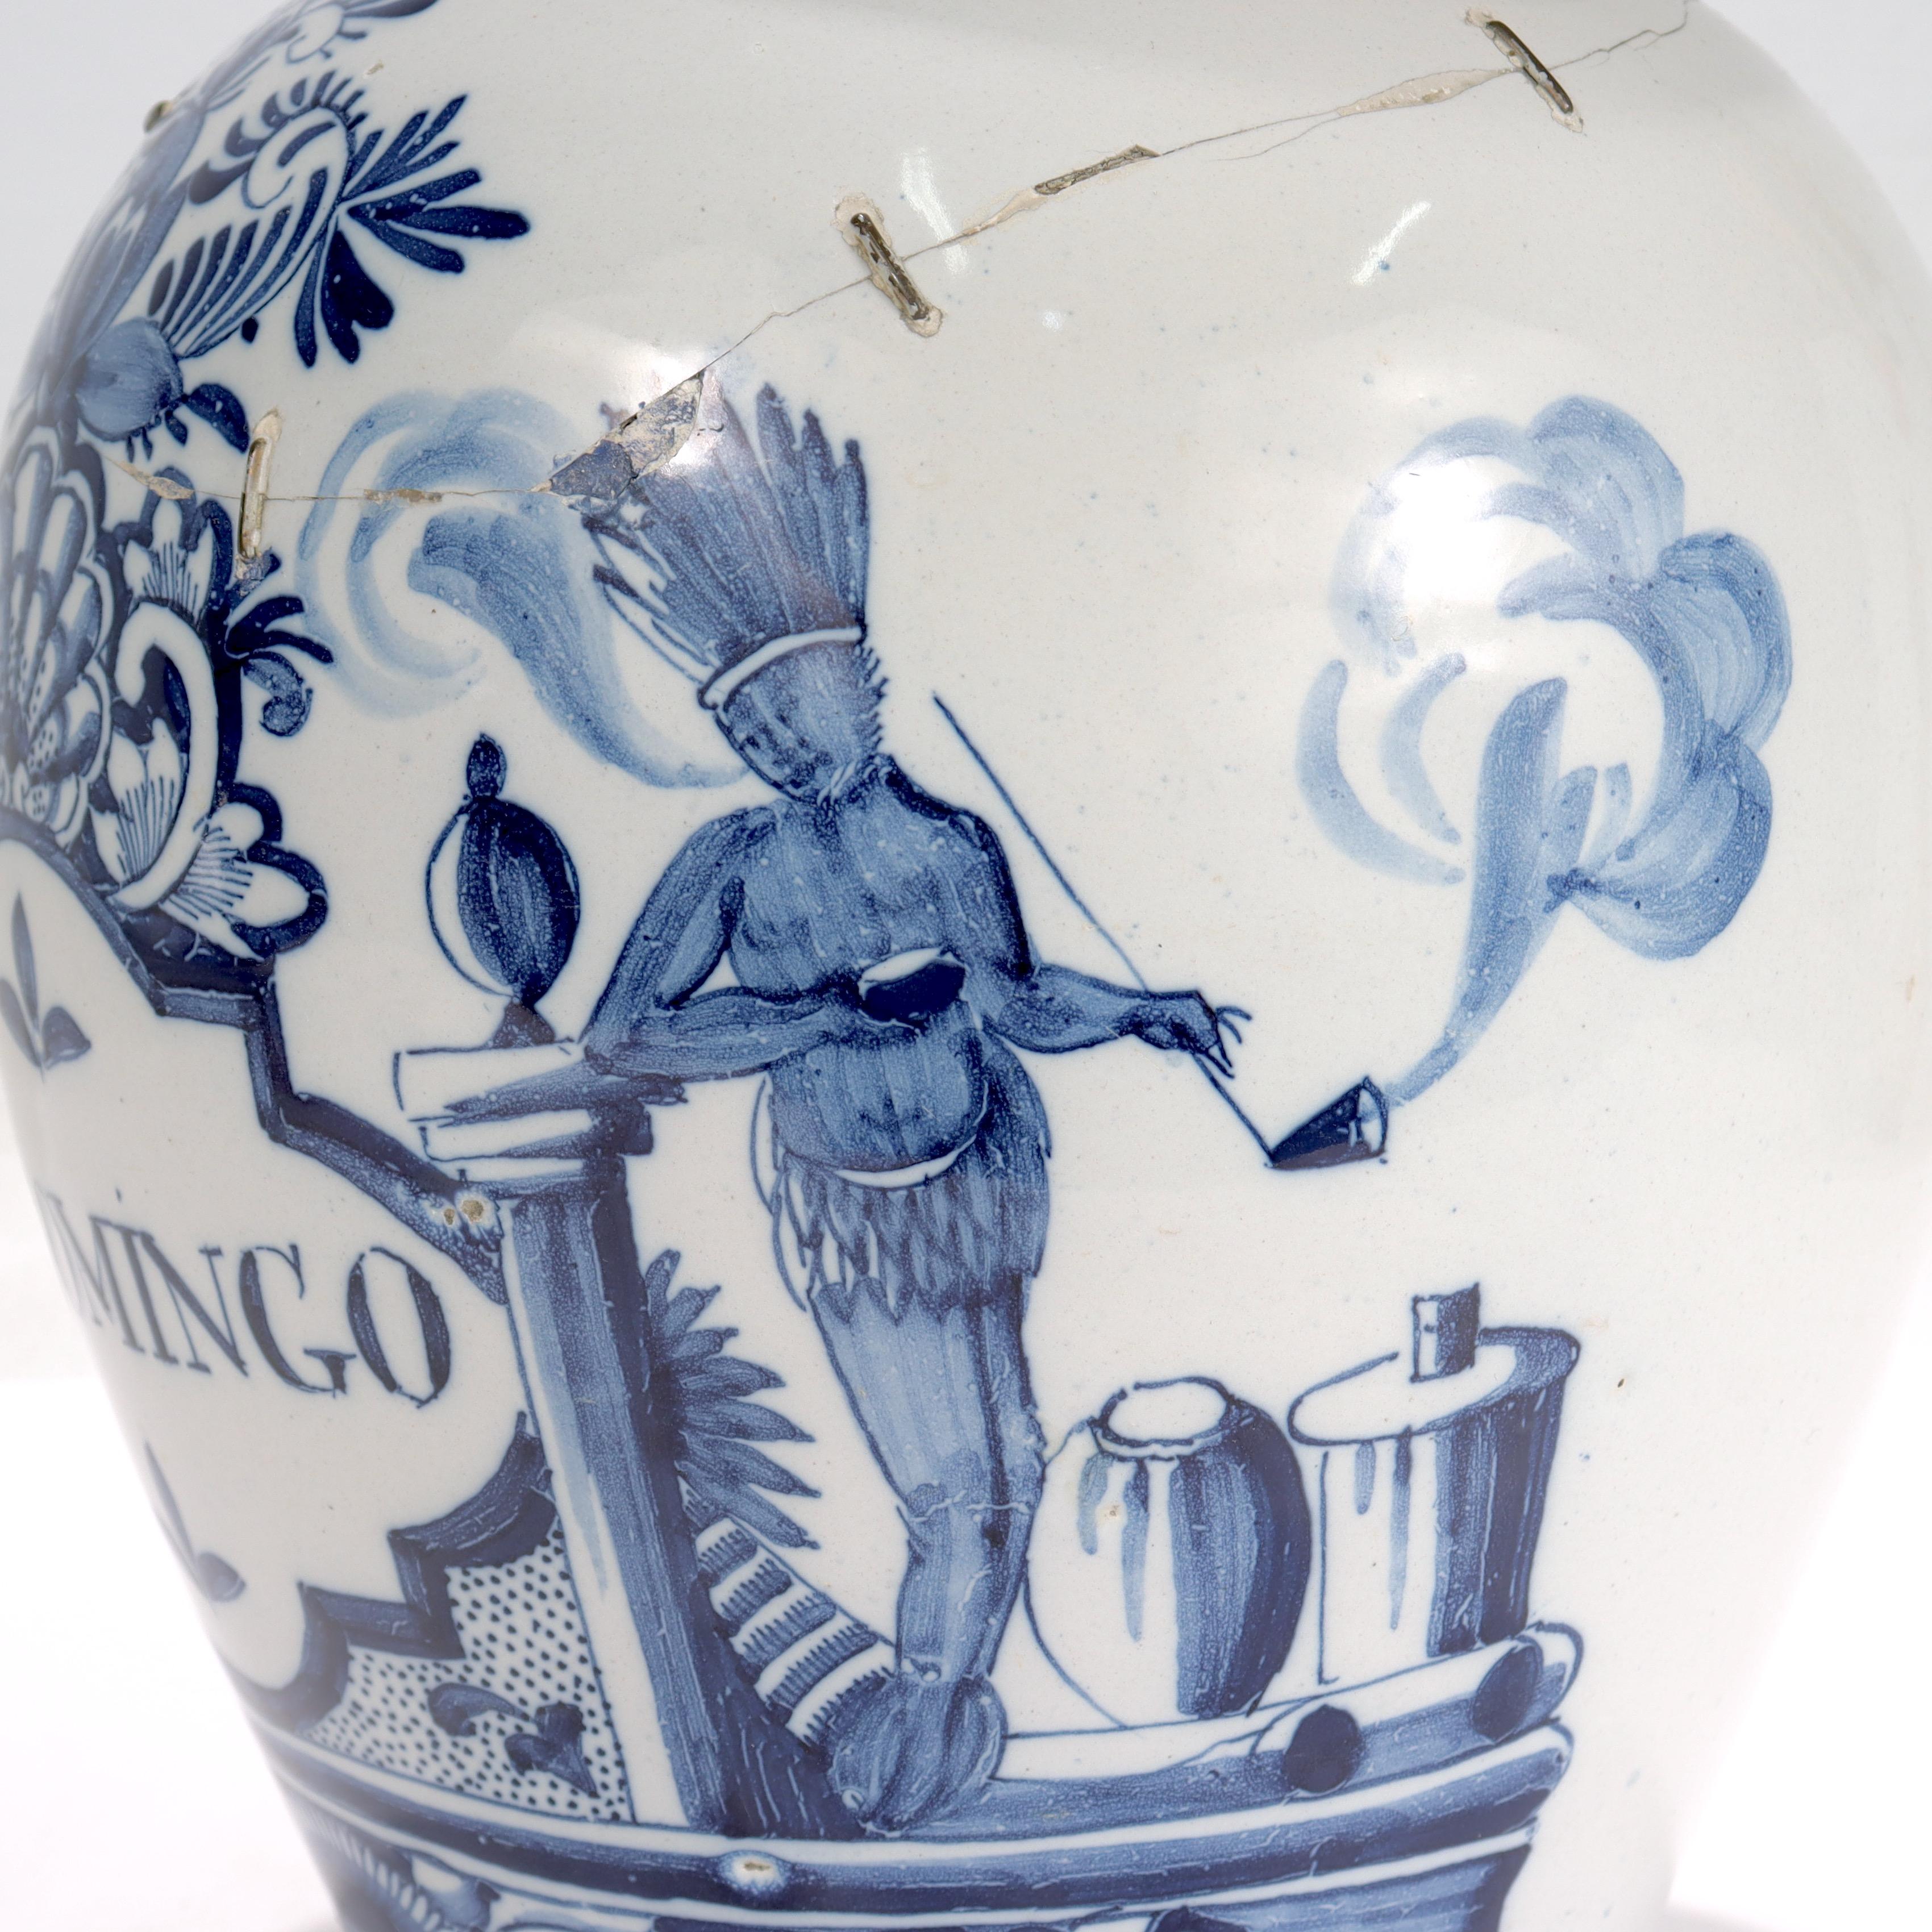 Hand-Painted Antique 18th Century Dutch Delft St. Domingo Tobacco Jar with American Indian